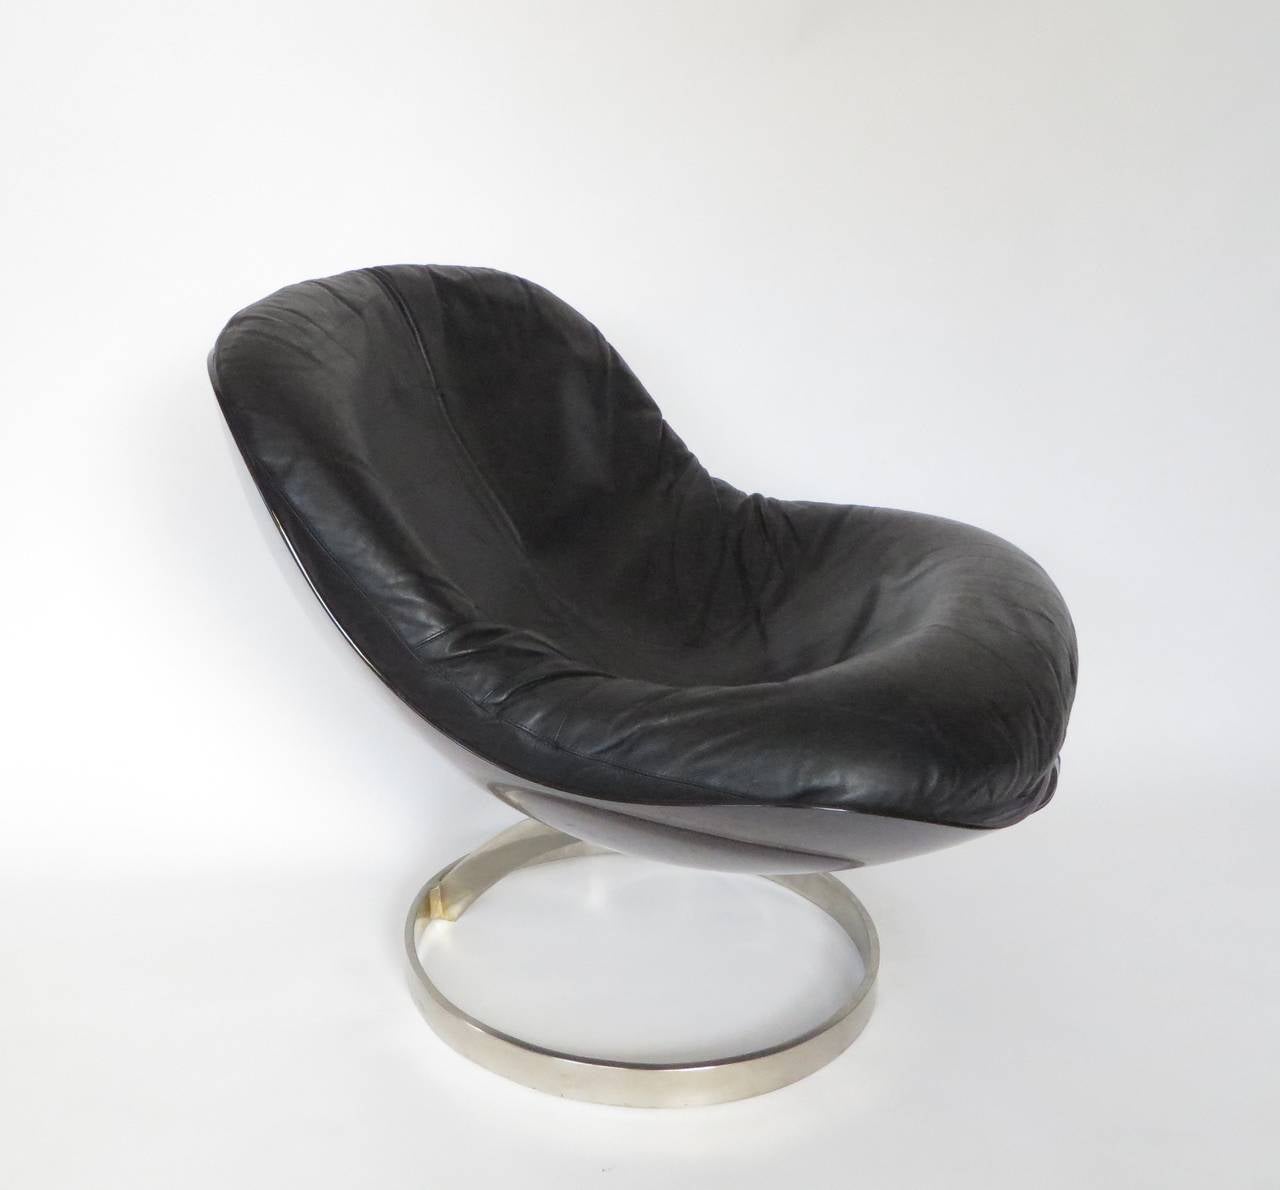 Boris Tabacoff smoked pale lavender plexiglas shell semi-spherical shape and black leather cushion chair on an industrial style bolted chromed steel circular base structure. The chromed steel circular base is 18